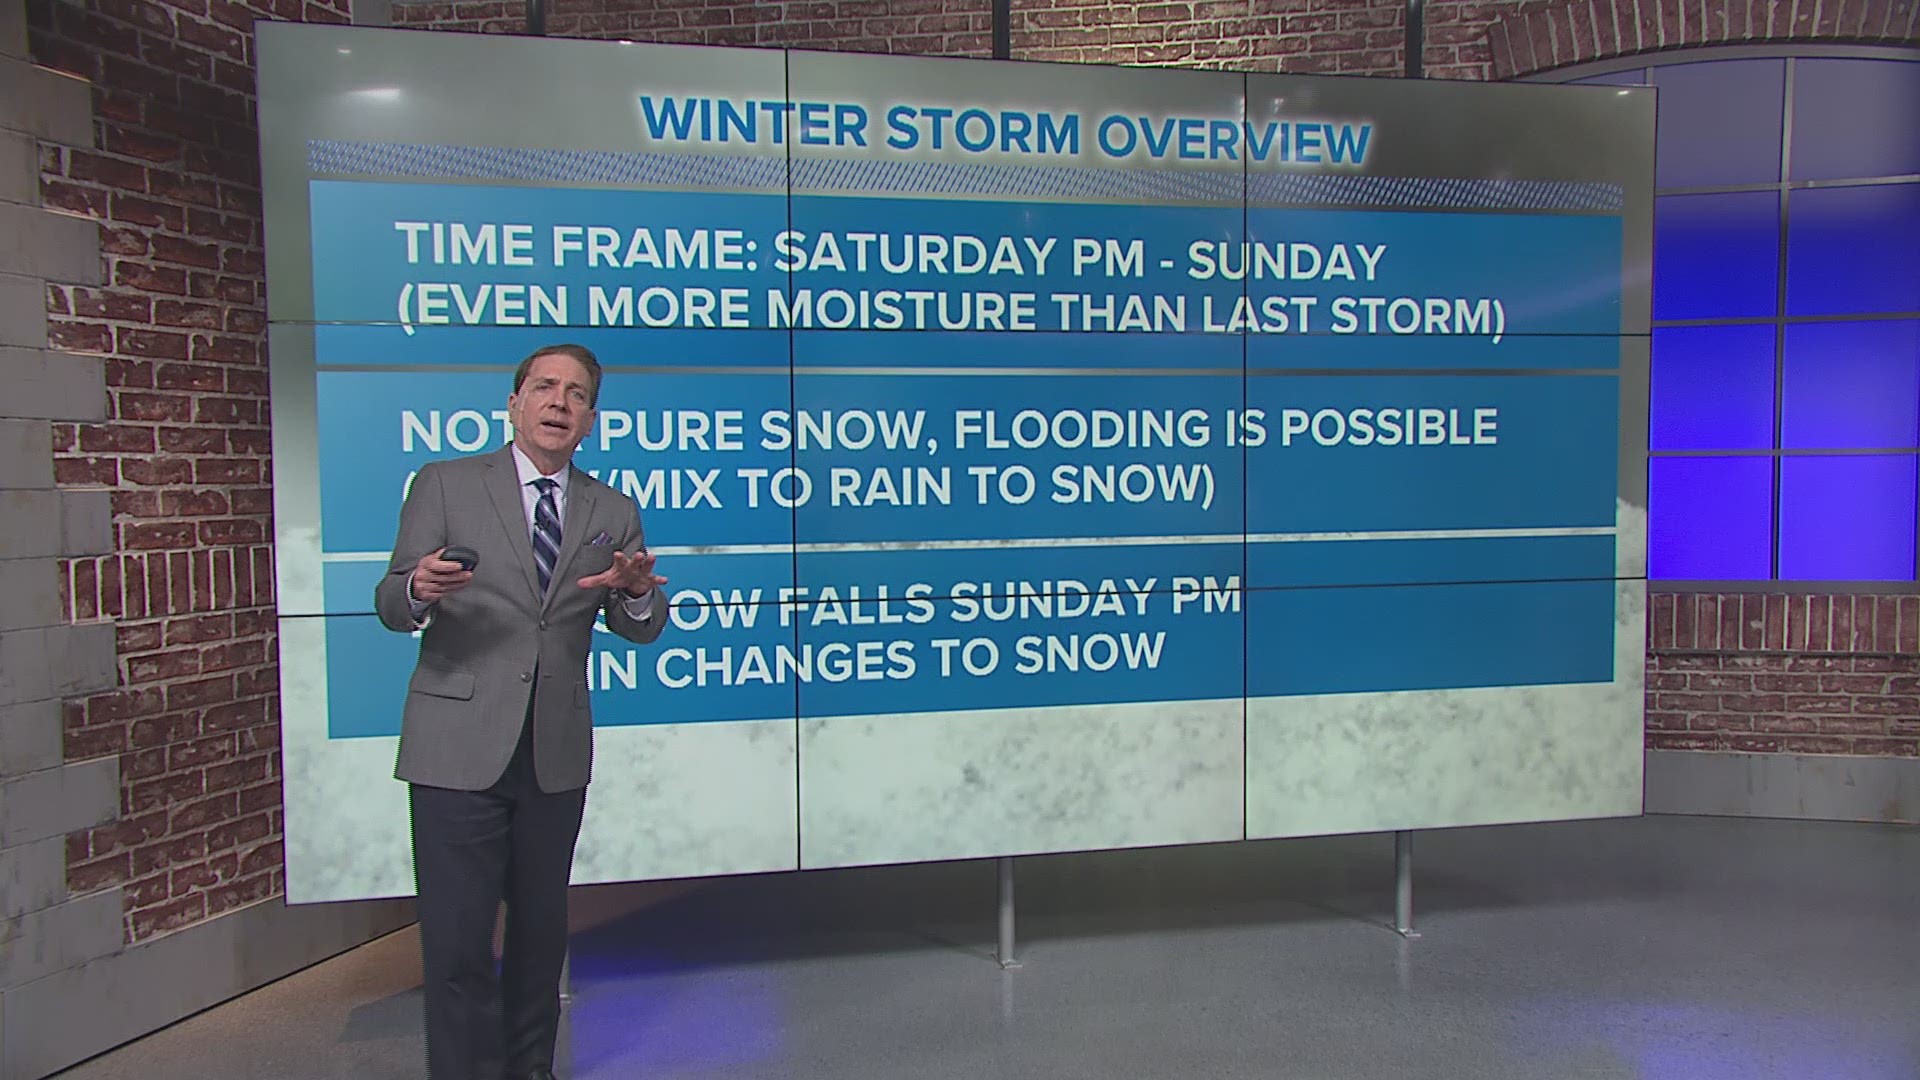 Meteorologist Topper Shutt has the latest forecast on this weekend's possible storm.